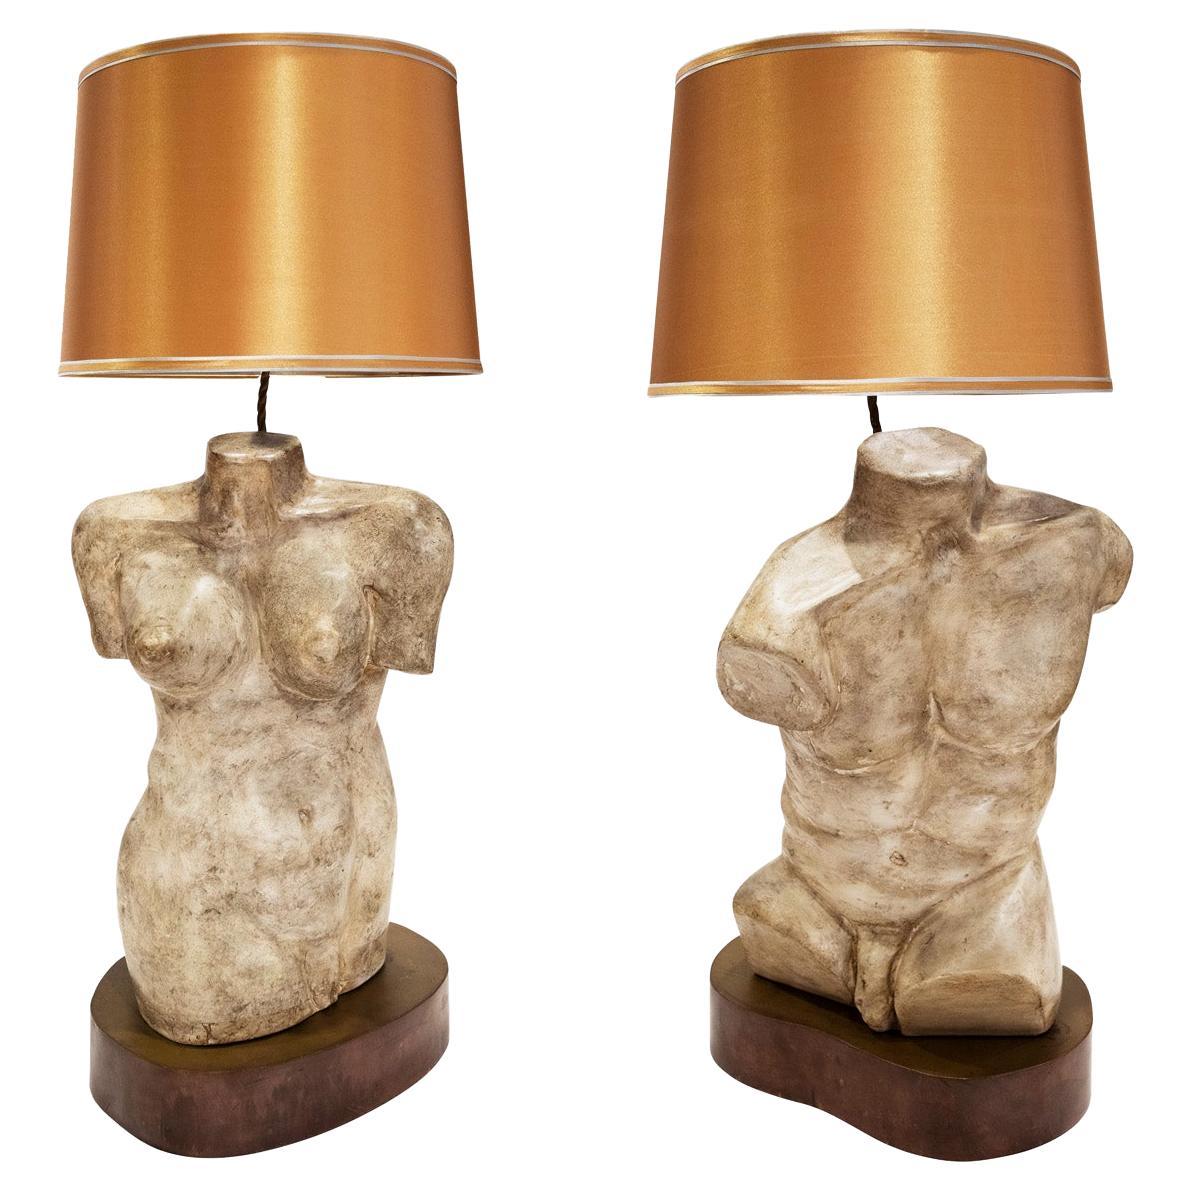 Philip & Kelvin Laverne Rare and Important Torso Table Lamps 1970s - Signed For Sale